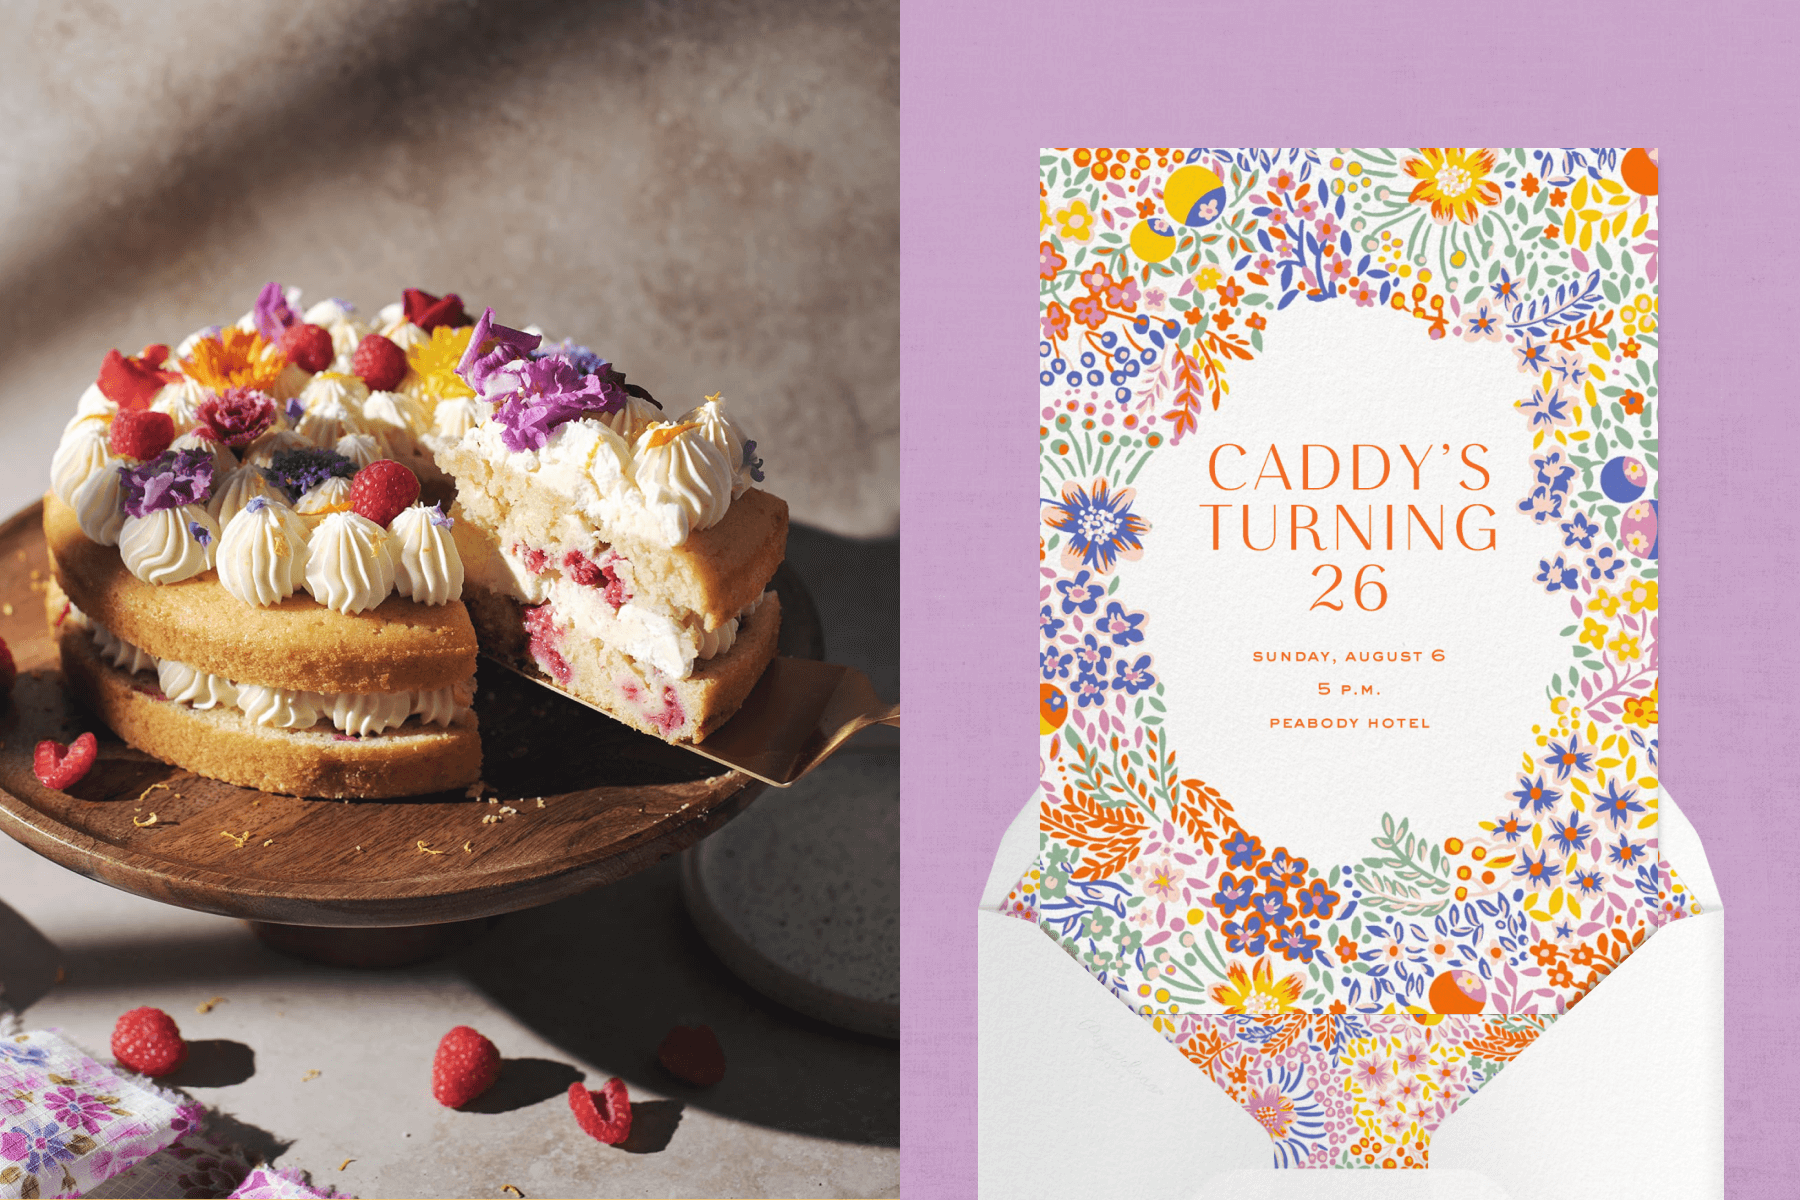 Left: A lemon raspberry tiered cake with fanciful frosting and edible flowers on a wood cake stand. Right: A birthday invitation with bright and colorful flower doodles forming a wide border around the center.